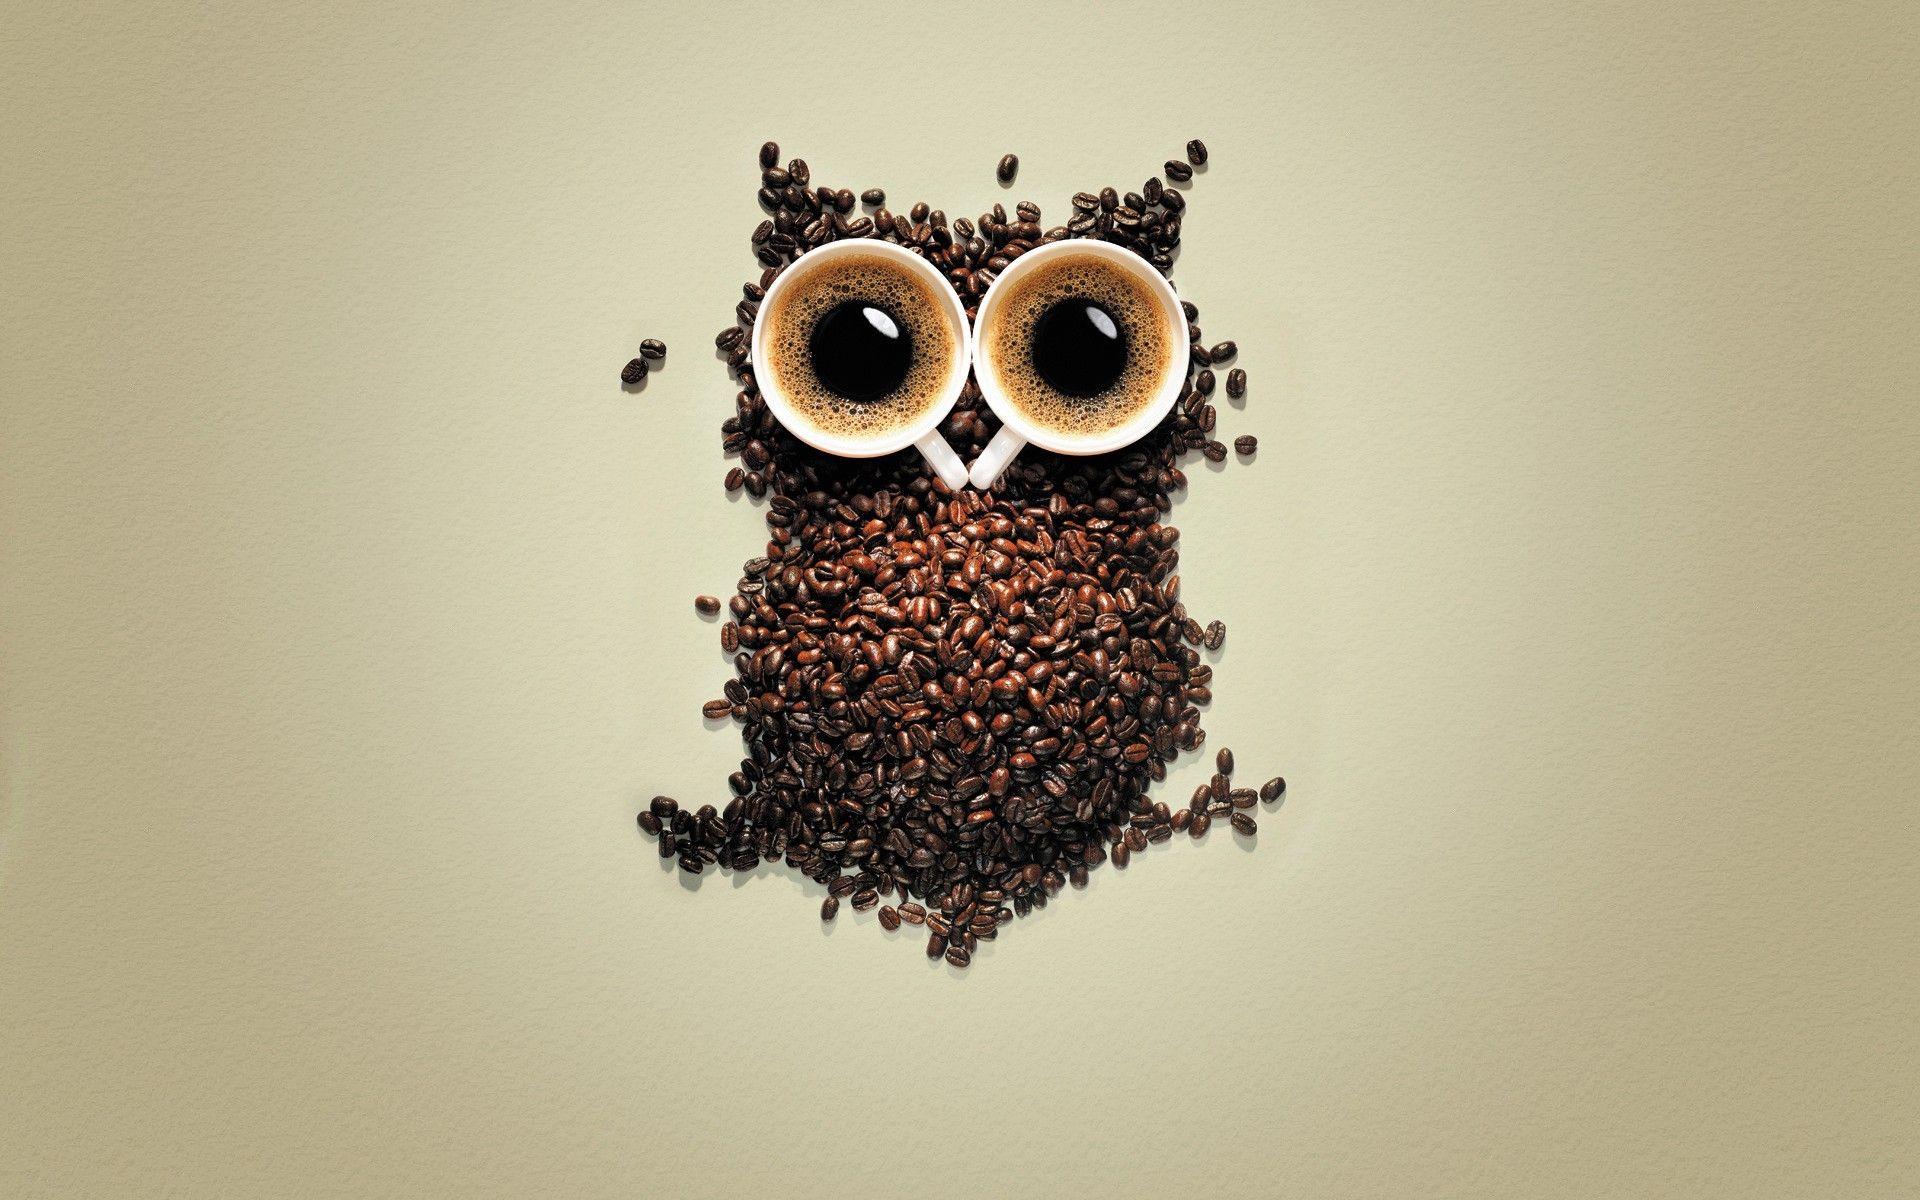 Cute Owl Tumblr Wallpapers For Iphone - Wallpaper Cave